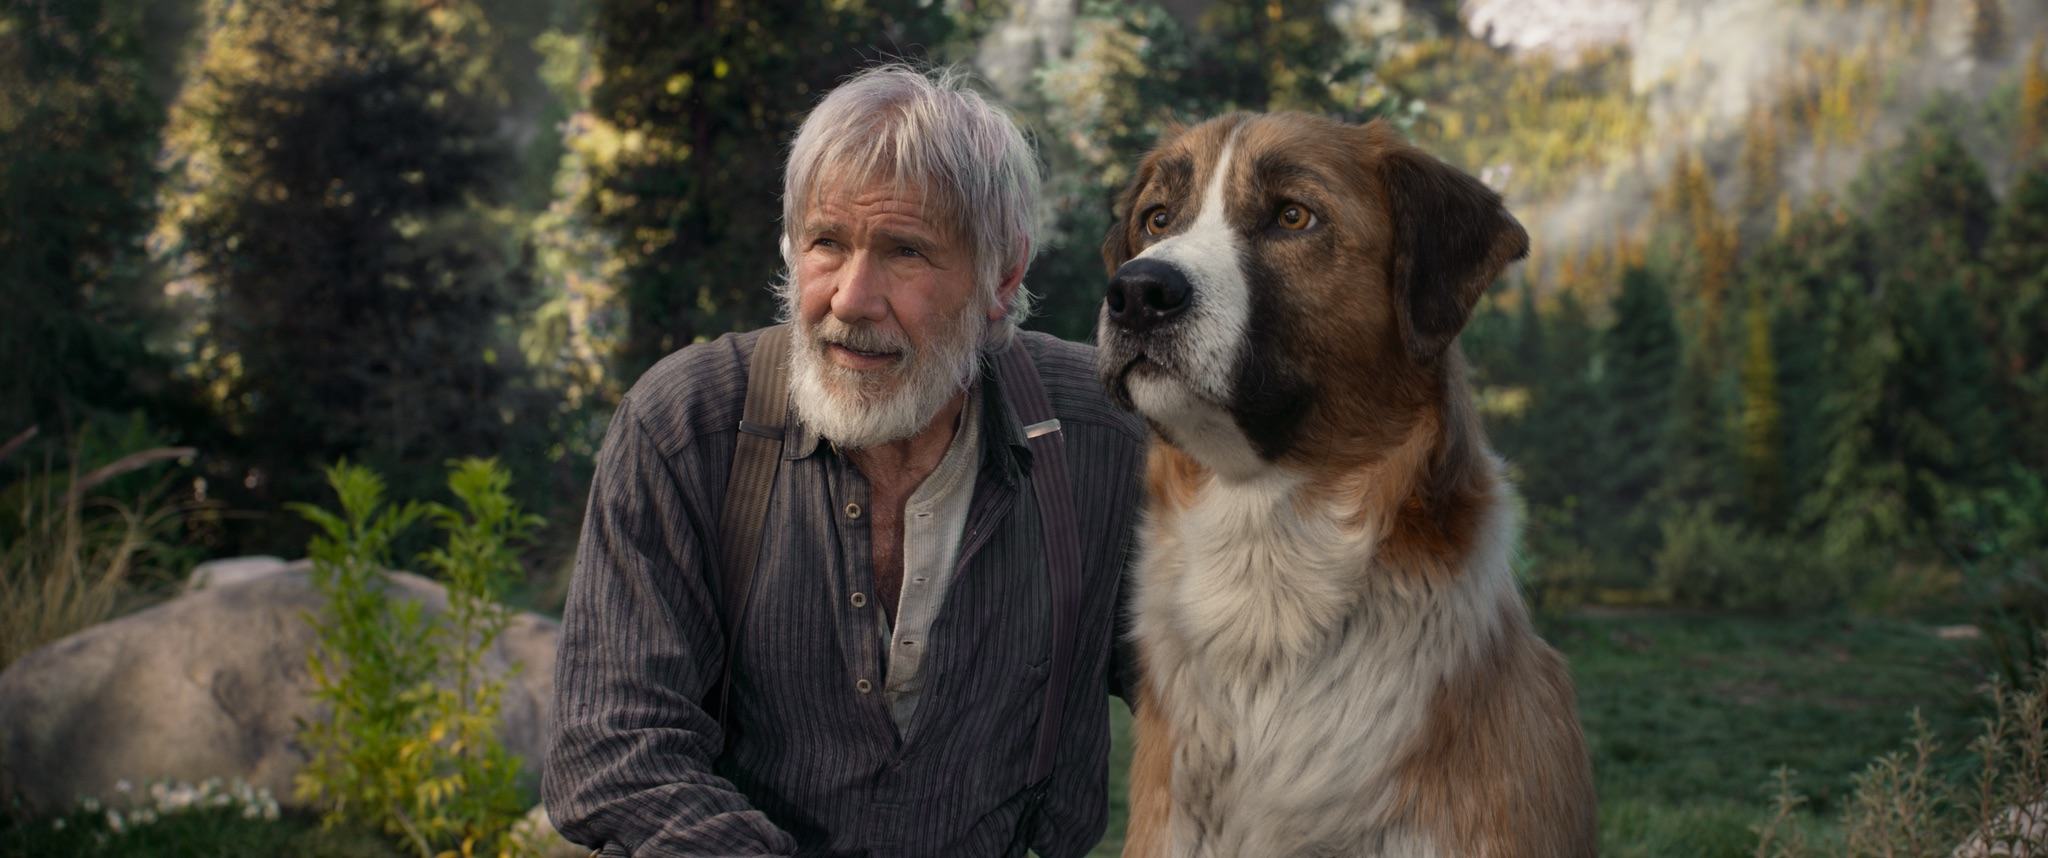 'Call of the Wild' Stars Harrison Ford & Omar Sy!